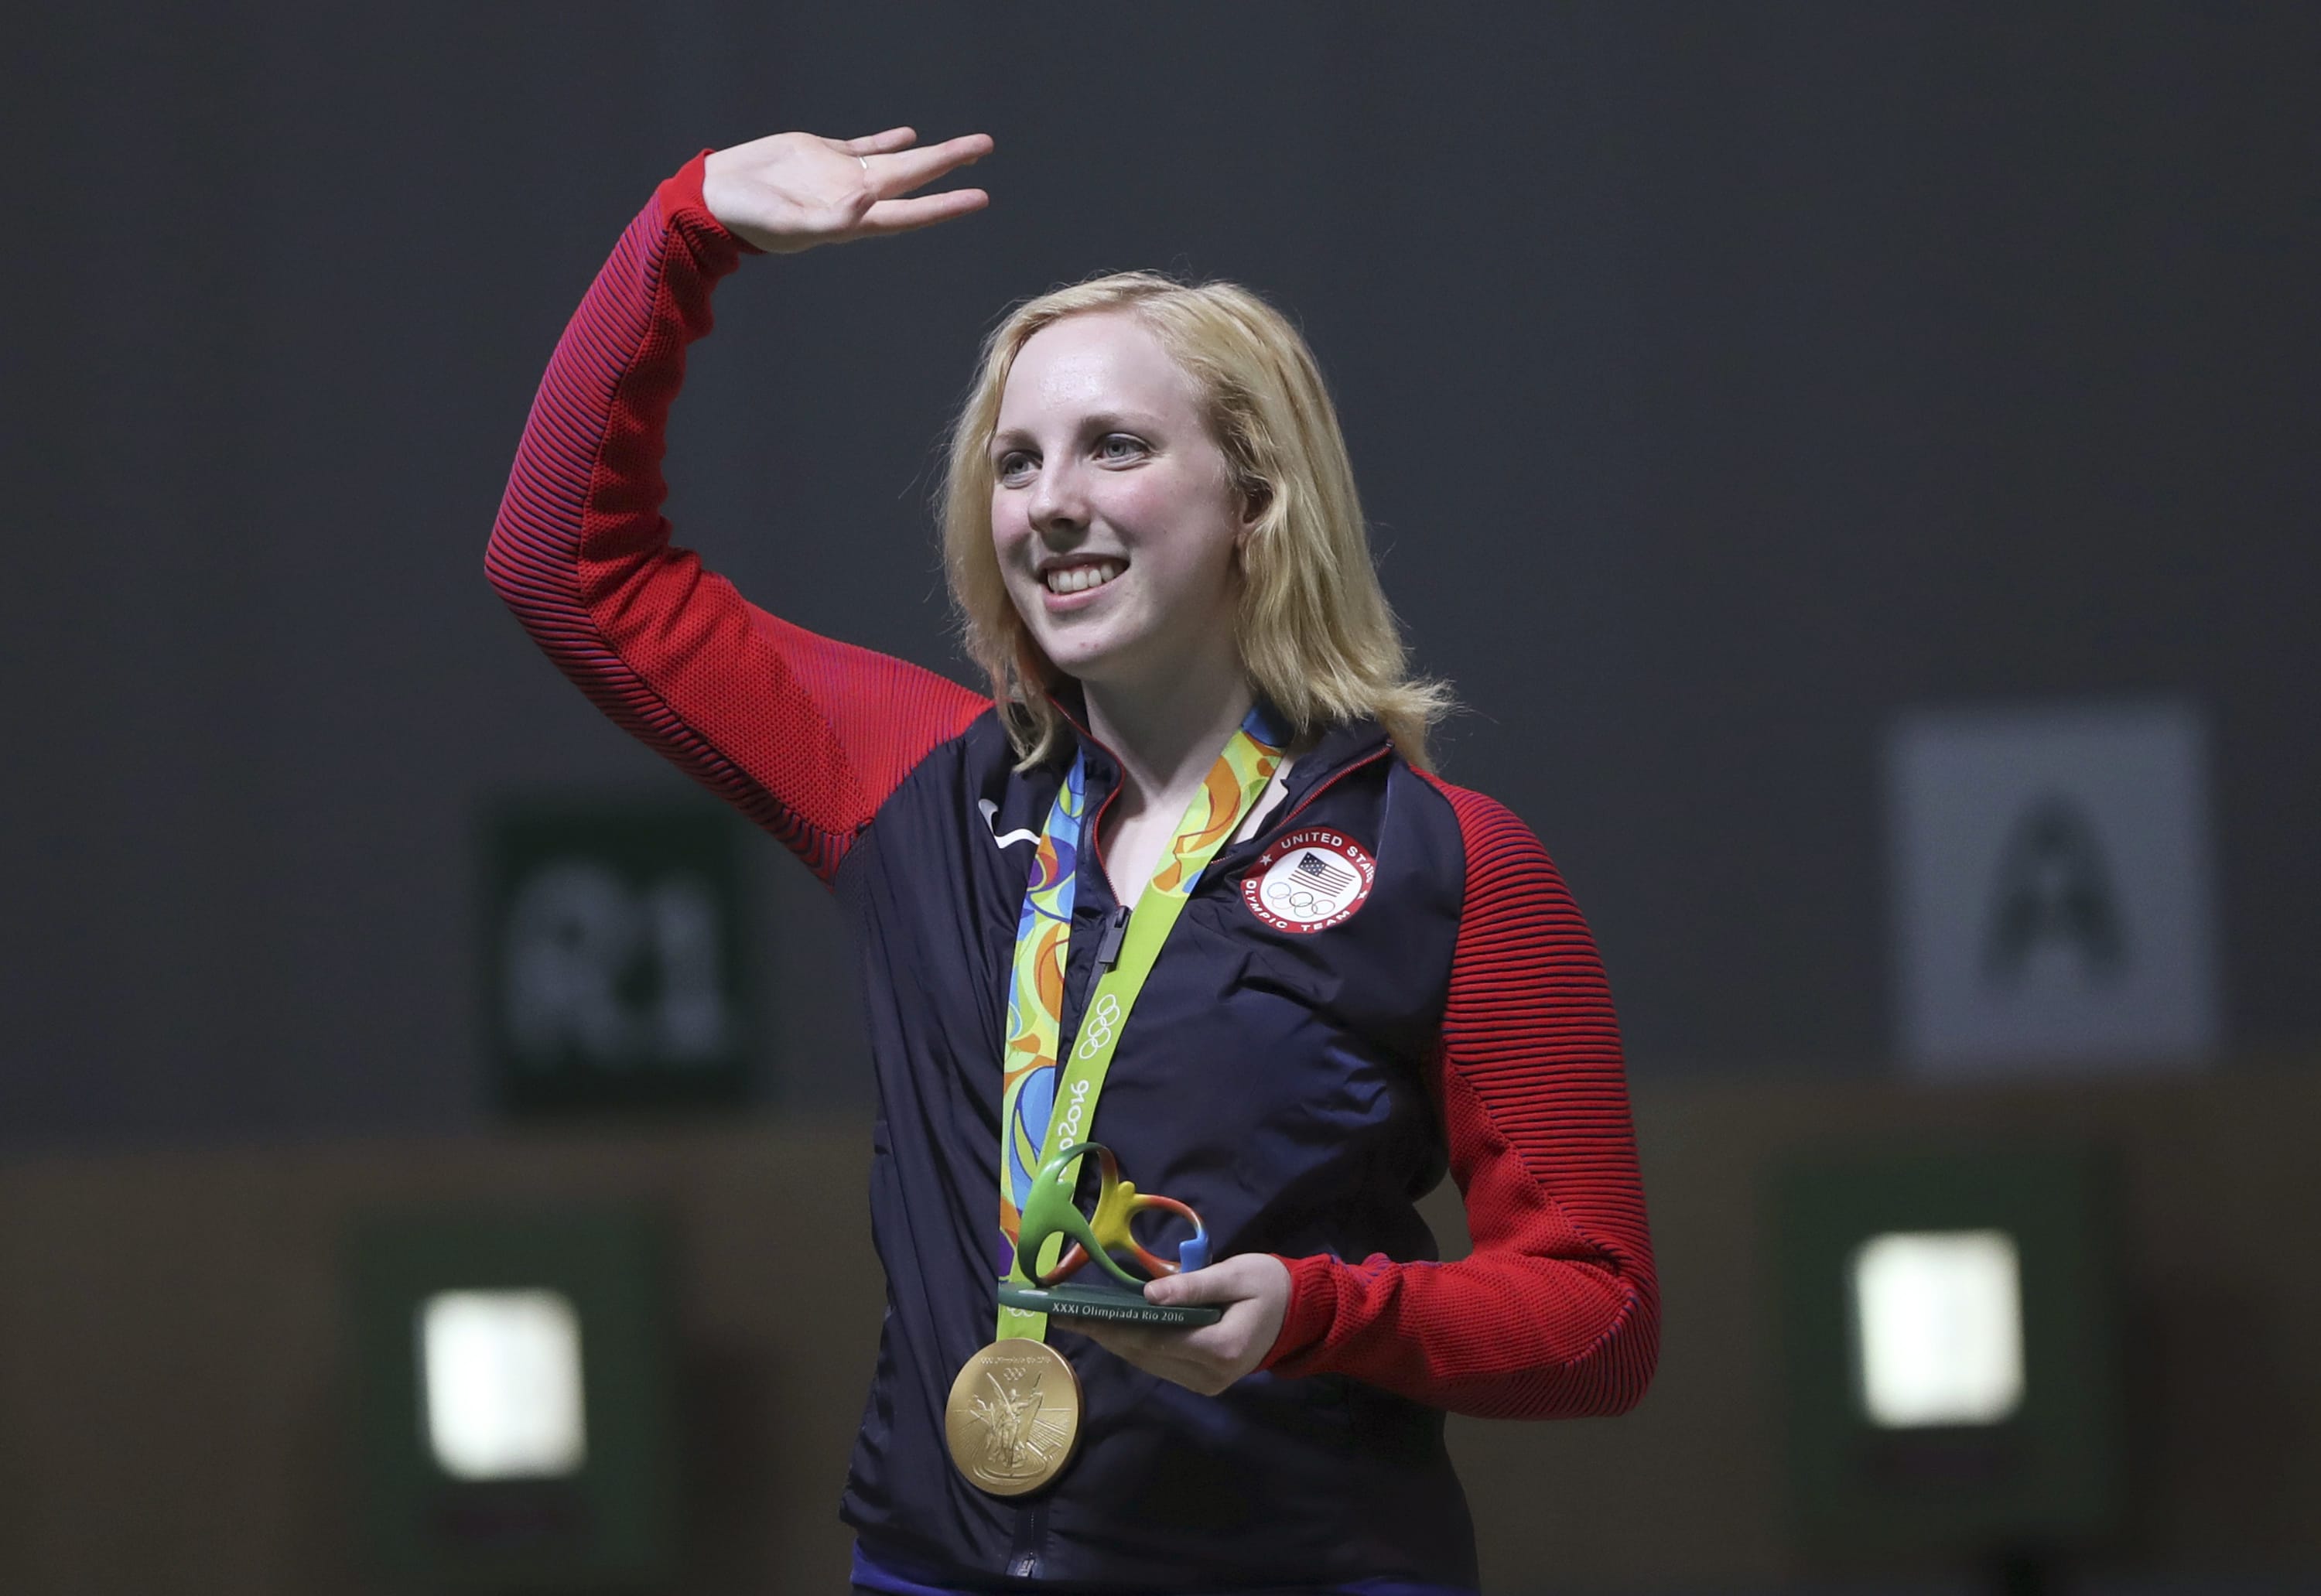 Virginia Thrasher of the United States waves after she received the gold medal for the Women's 10m Air Rifle competition at Olympic Shooting Center at the 2016 Summer Olympics in Rio de Janeiro, Brazil, Saturday, Aug. 6, 2016.